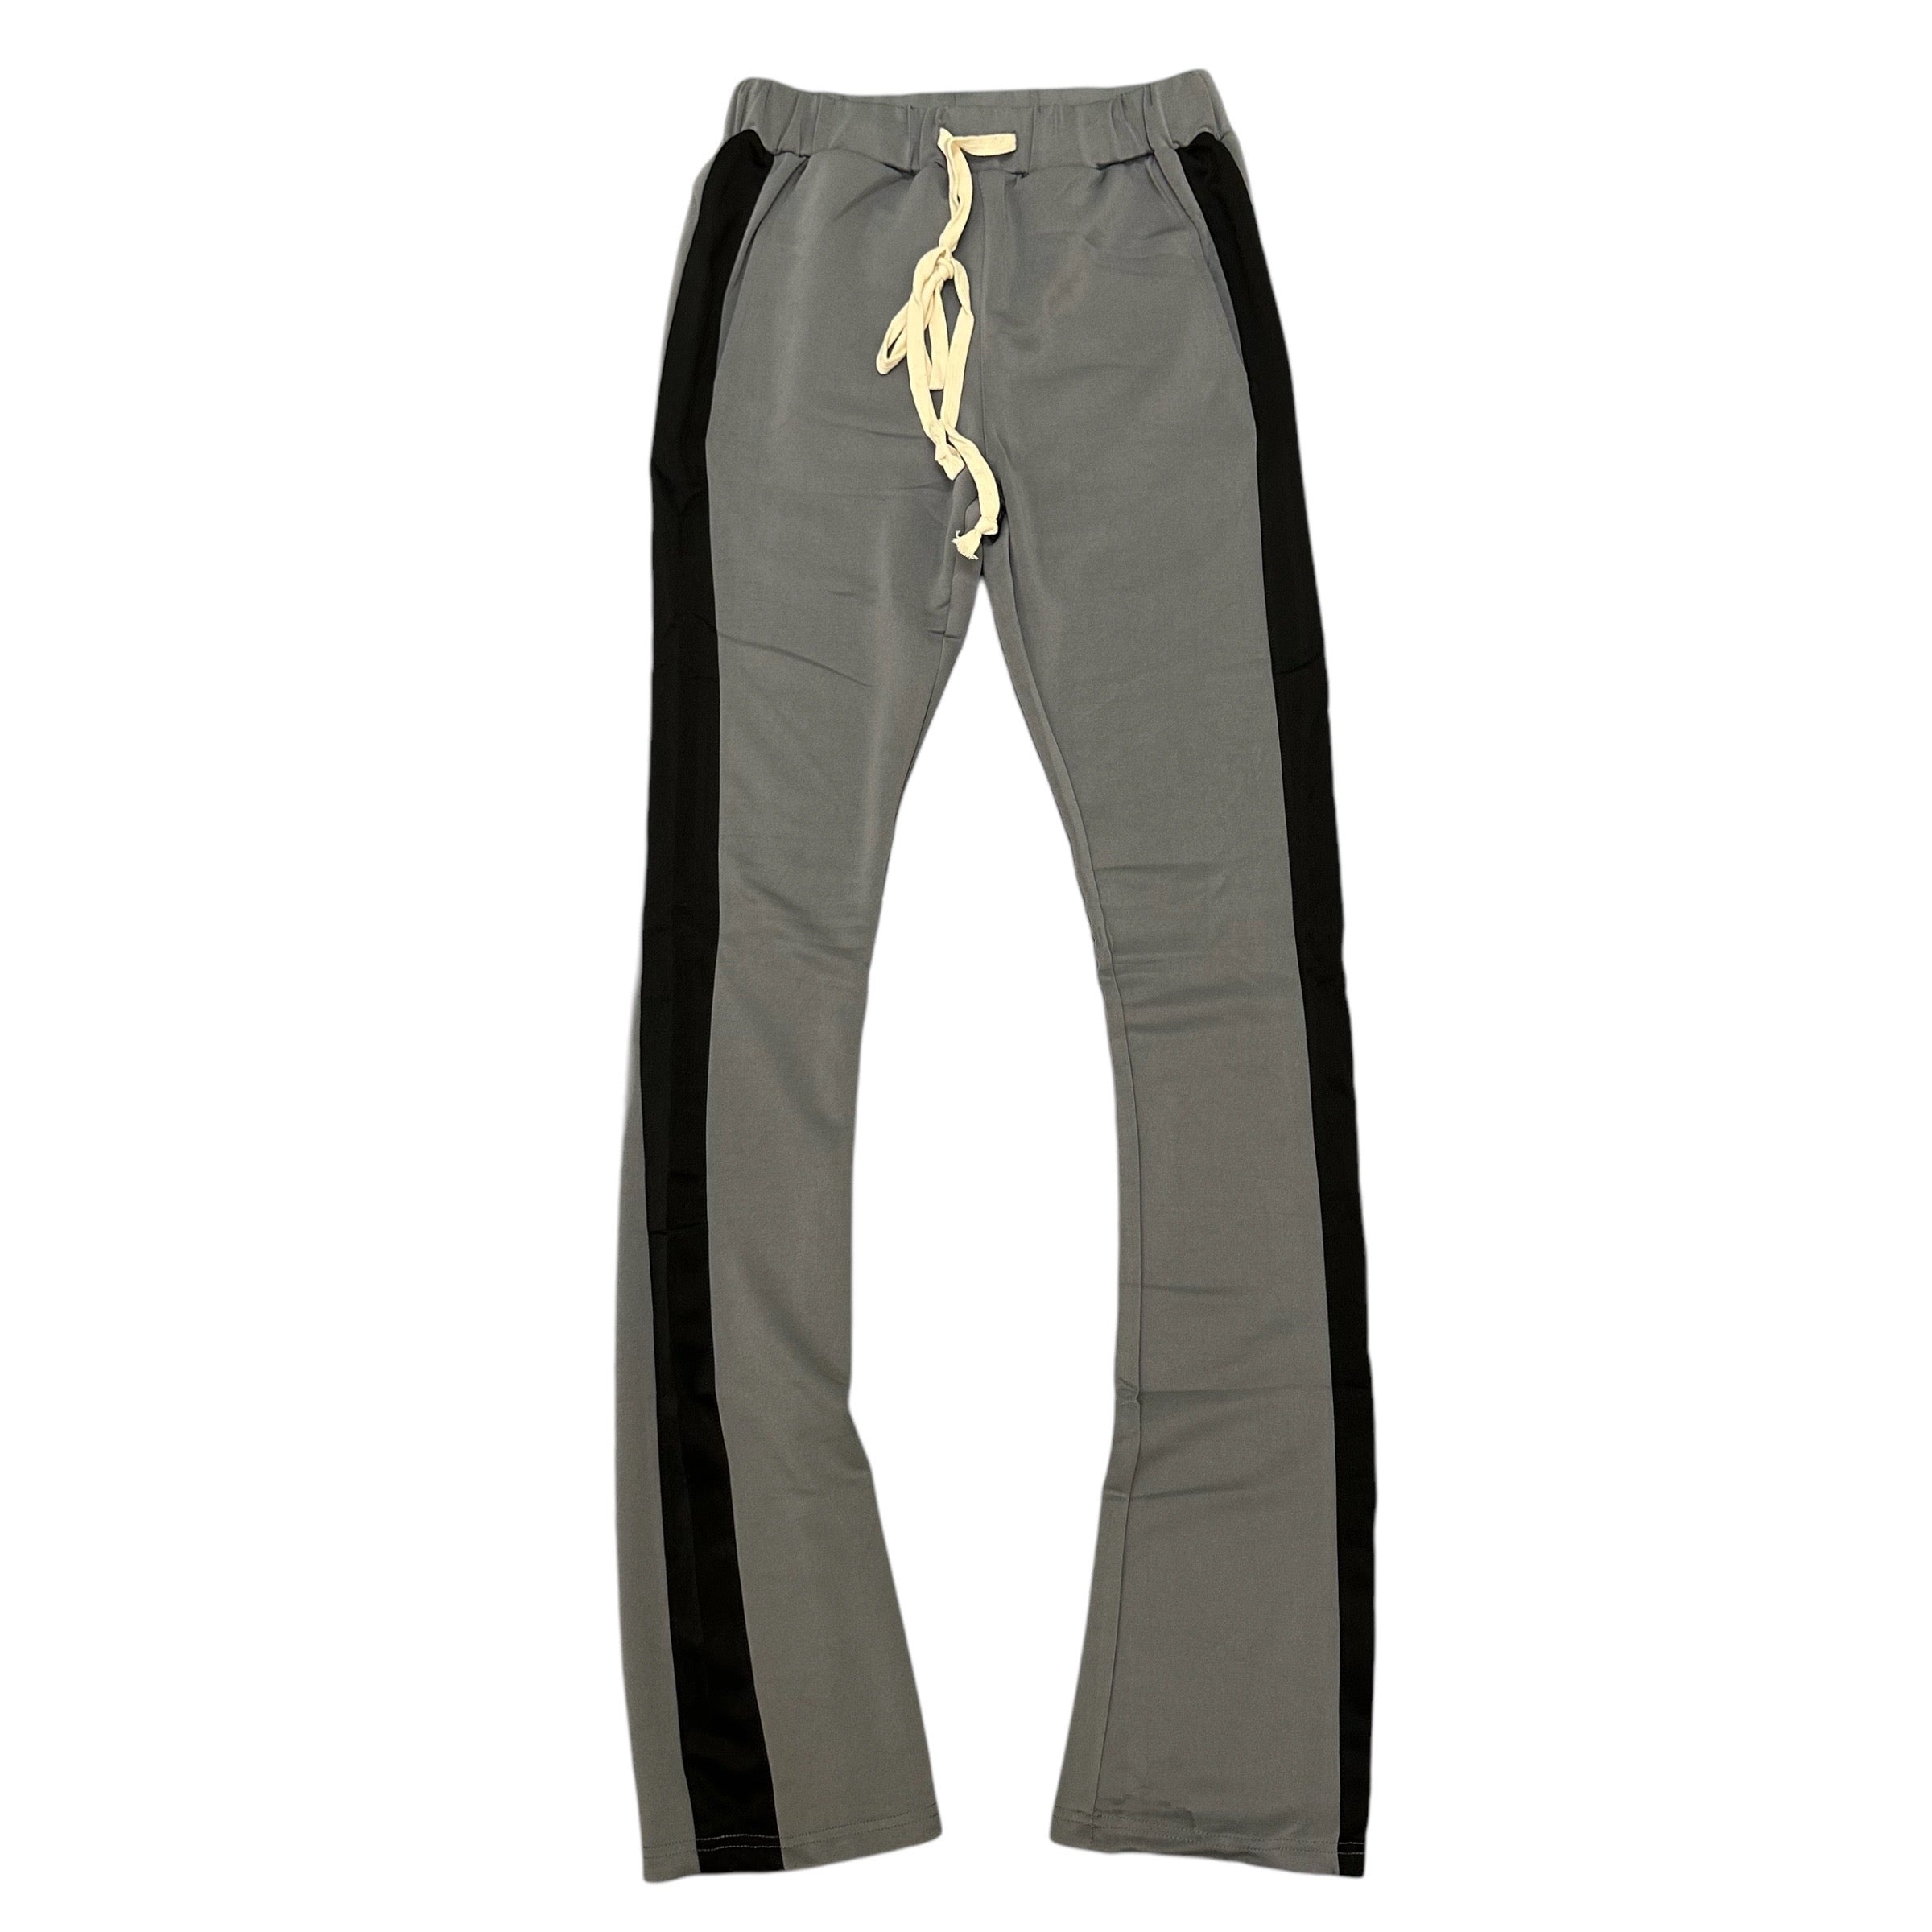 Ckel Stacked Track Pants Charcoal Black 555